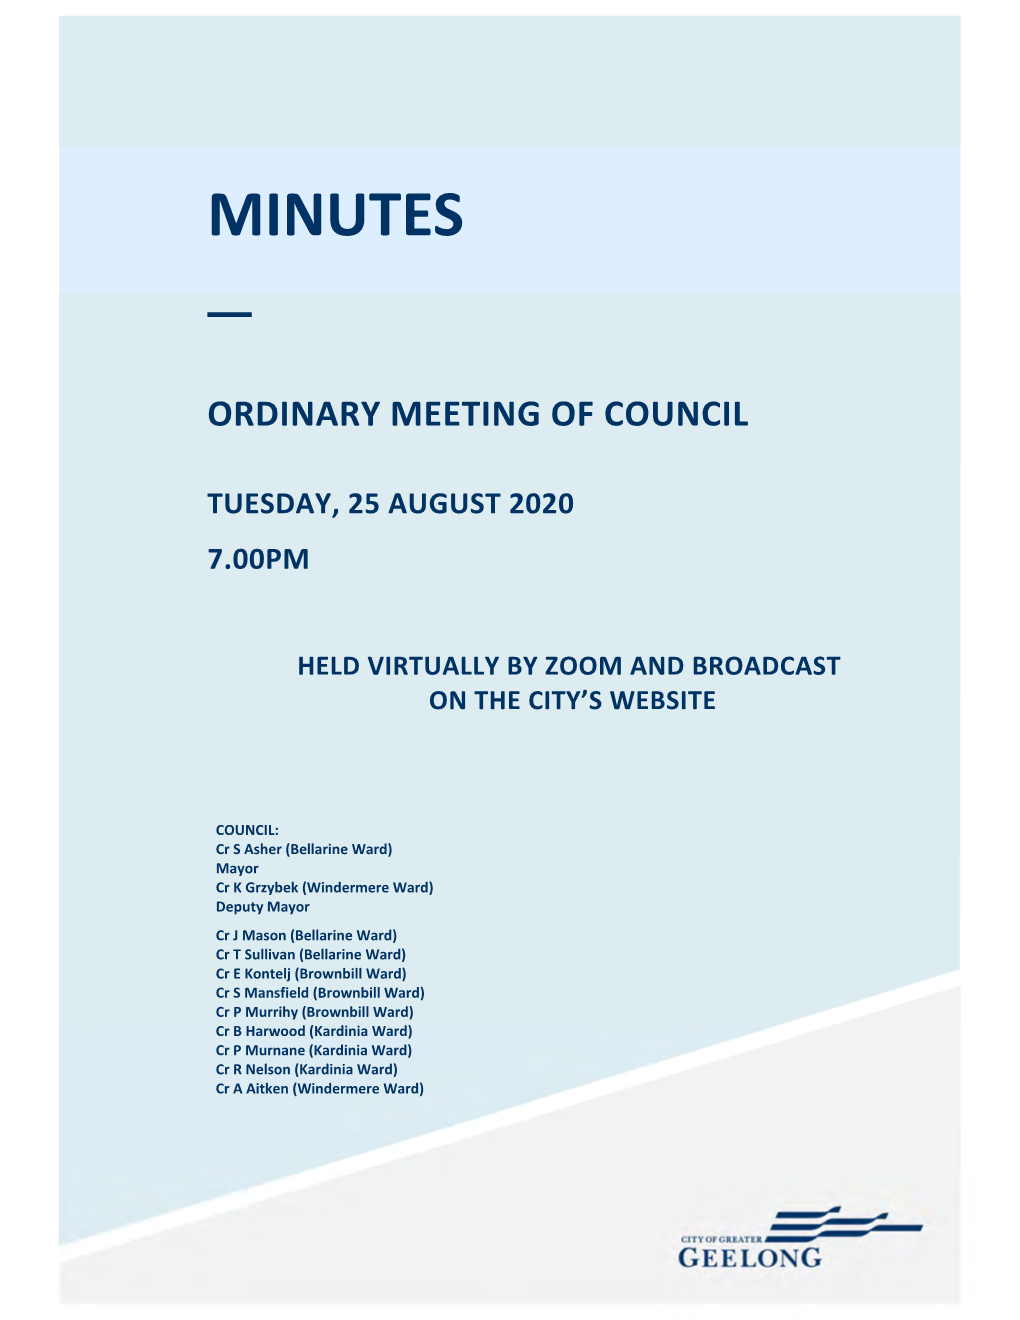 City of Greater Geelong Council Minutes